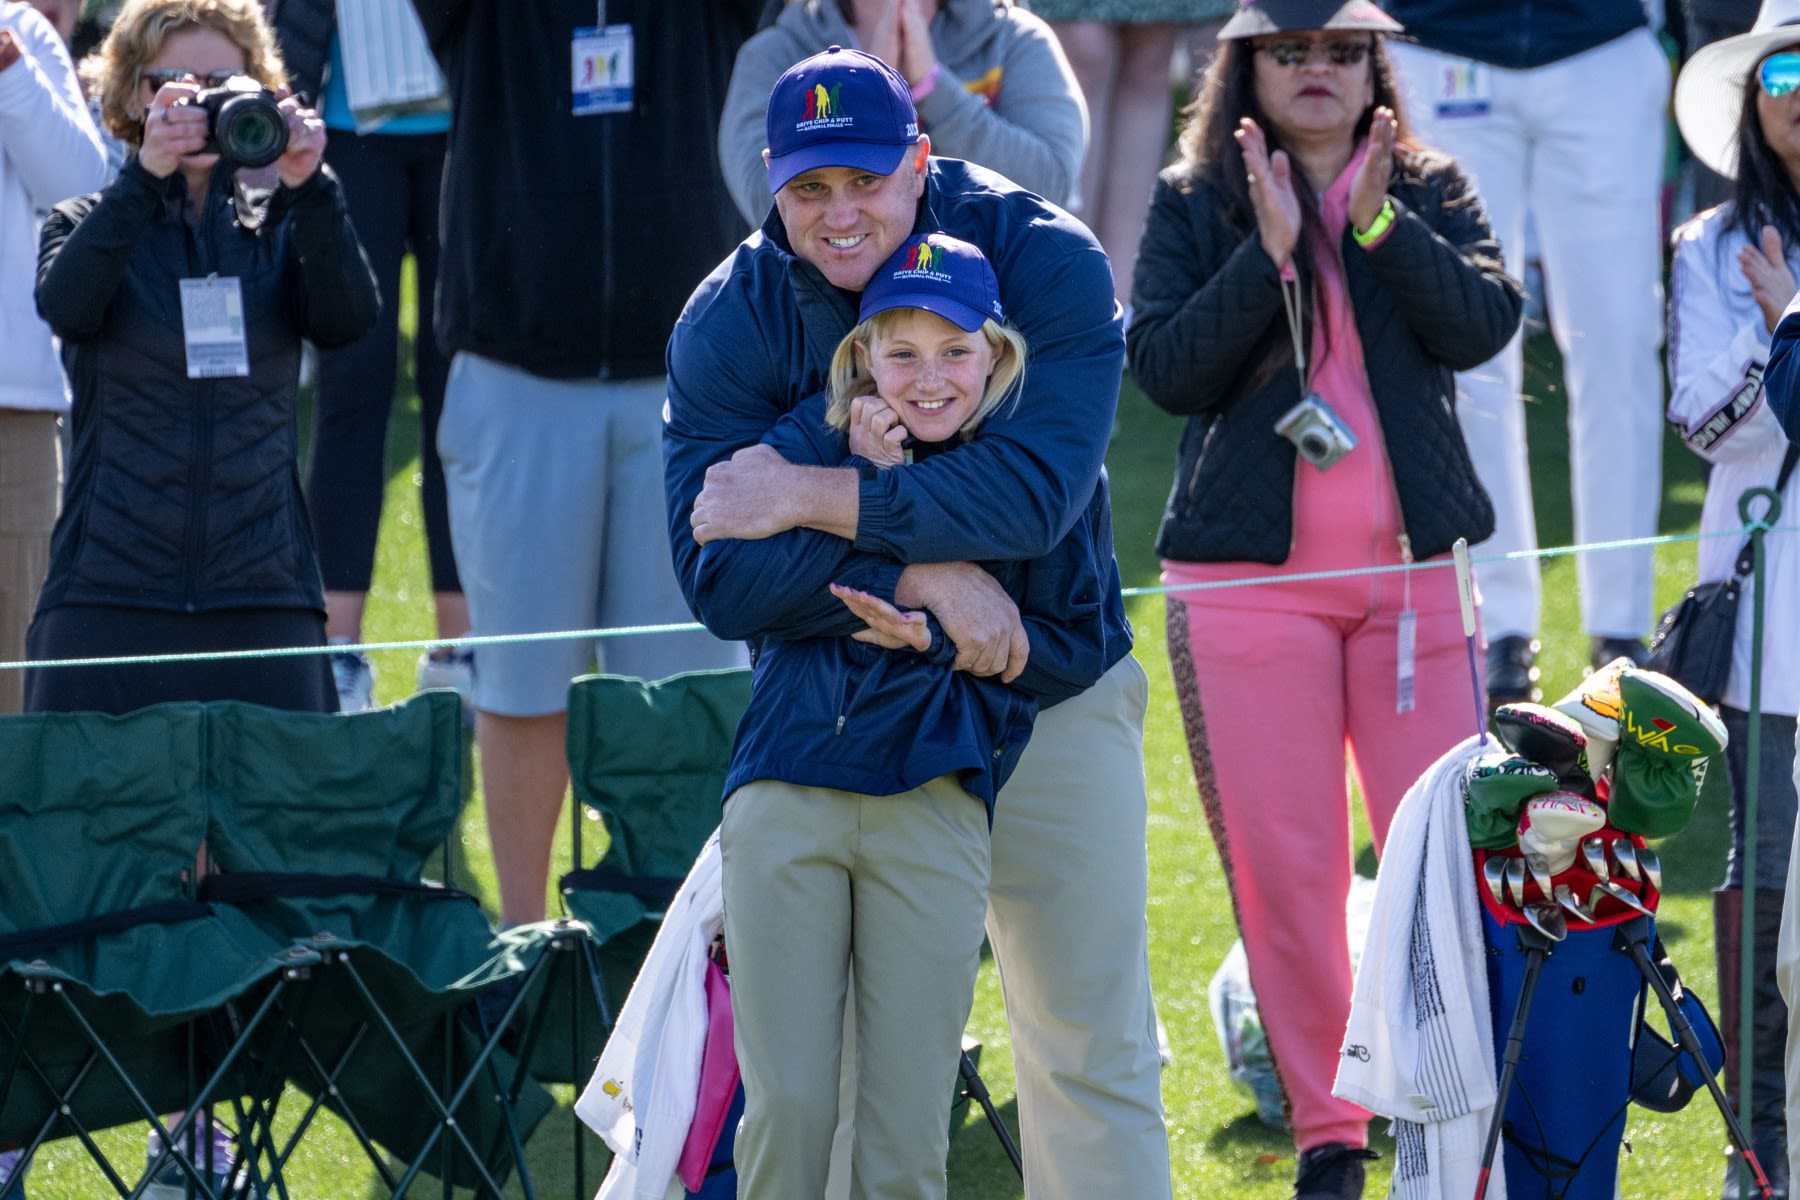 Madison Pyatt and her father after winning the Girls' 7-9 Division. (Augusta National Golf Club)